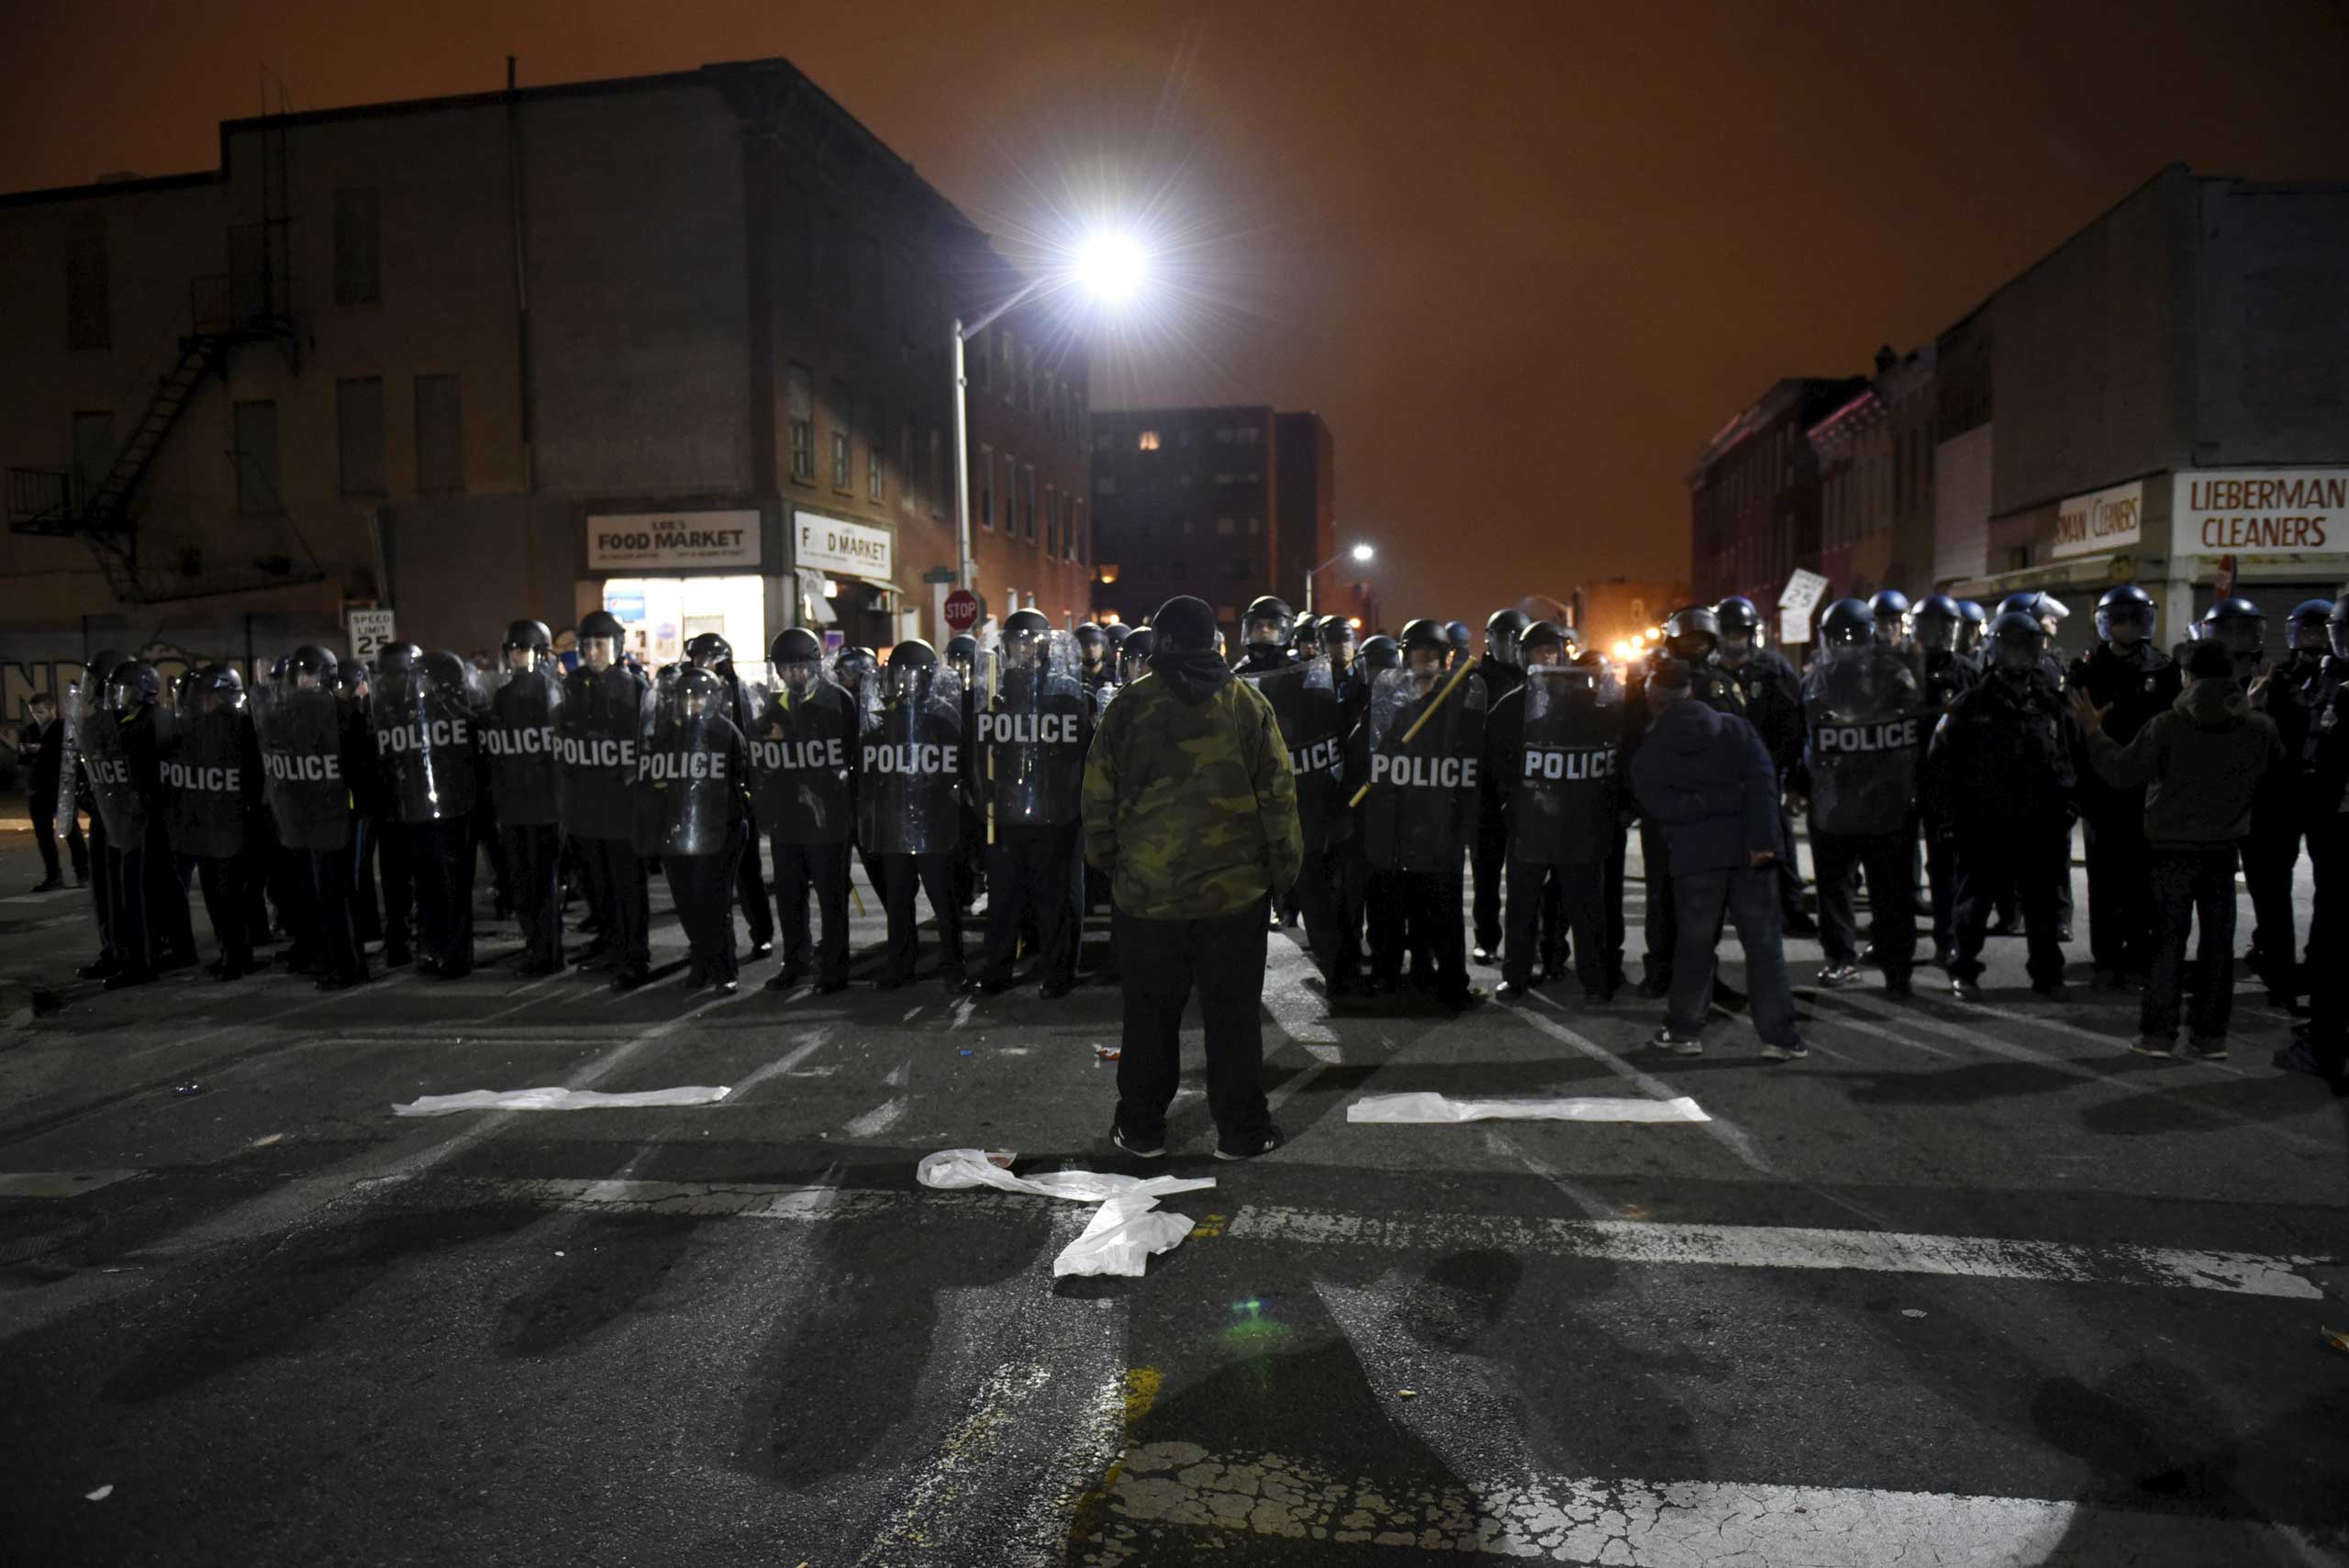 A demonstrator confronts law enforcement officers near Baltimore Police Department Western District in Baltimore on April 25, 2015.